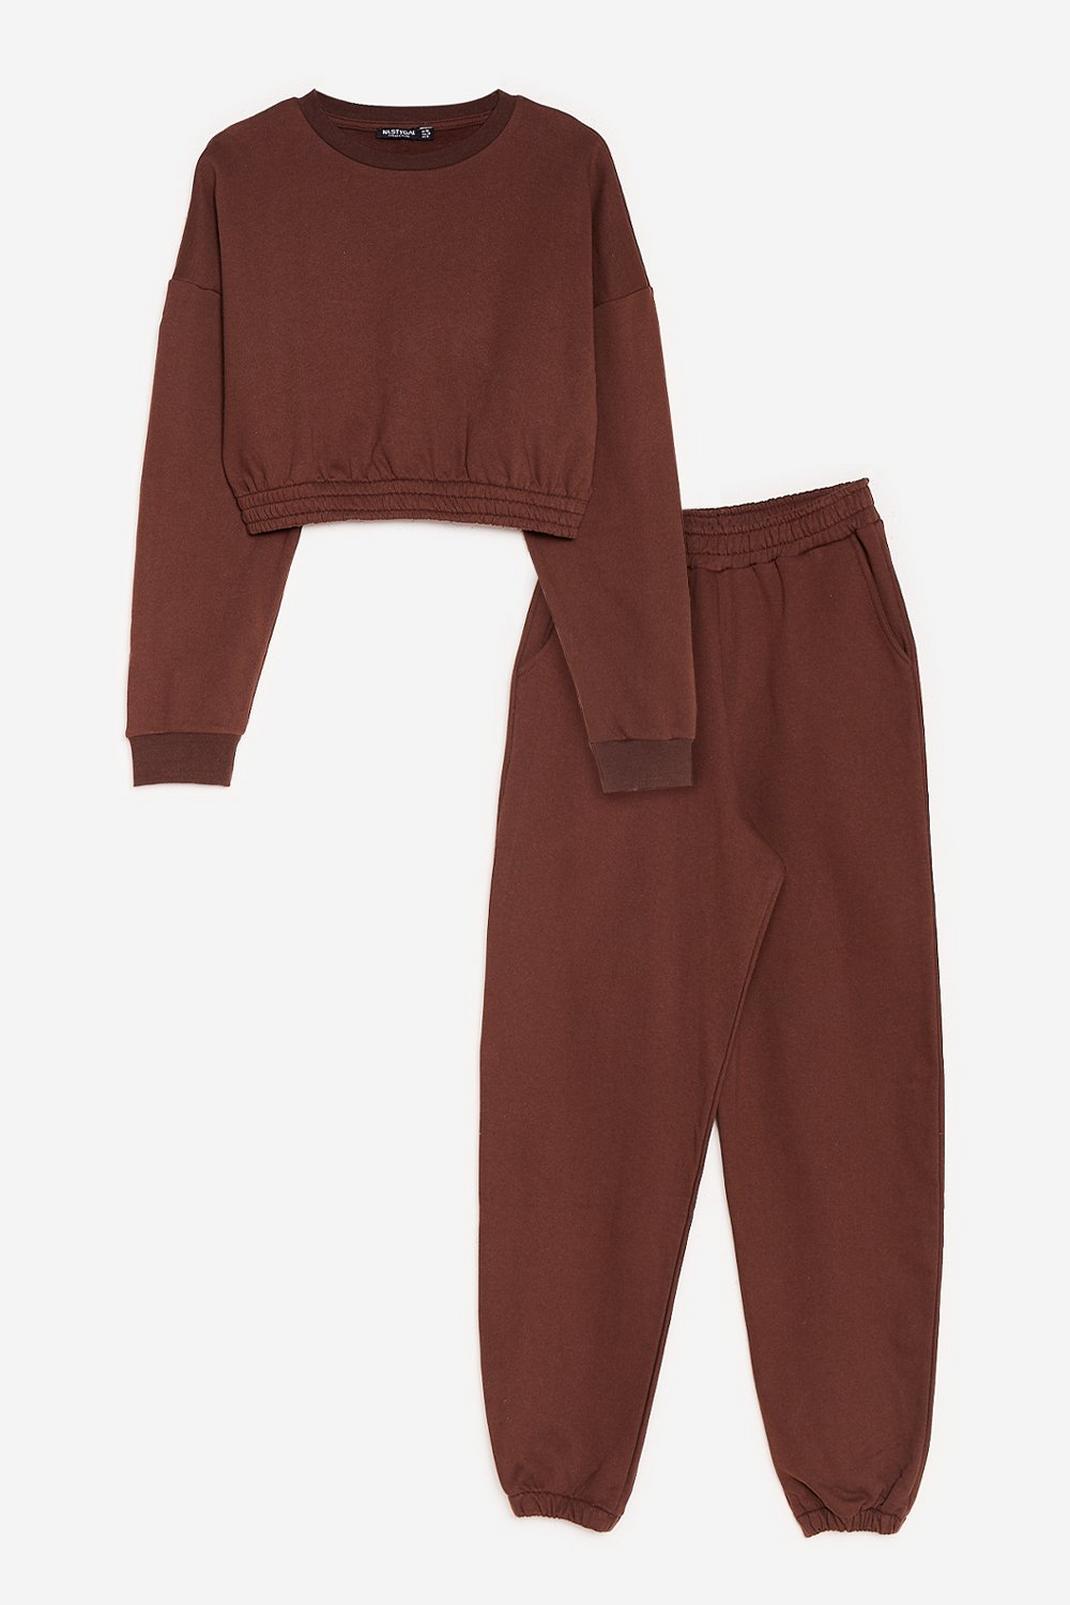 Brown Slouchy Sweatshirt and Joggers Loungewear Set image number 1